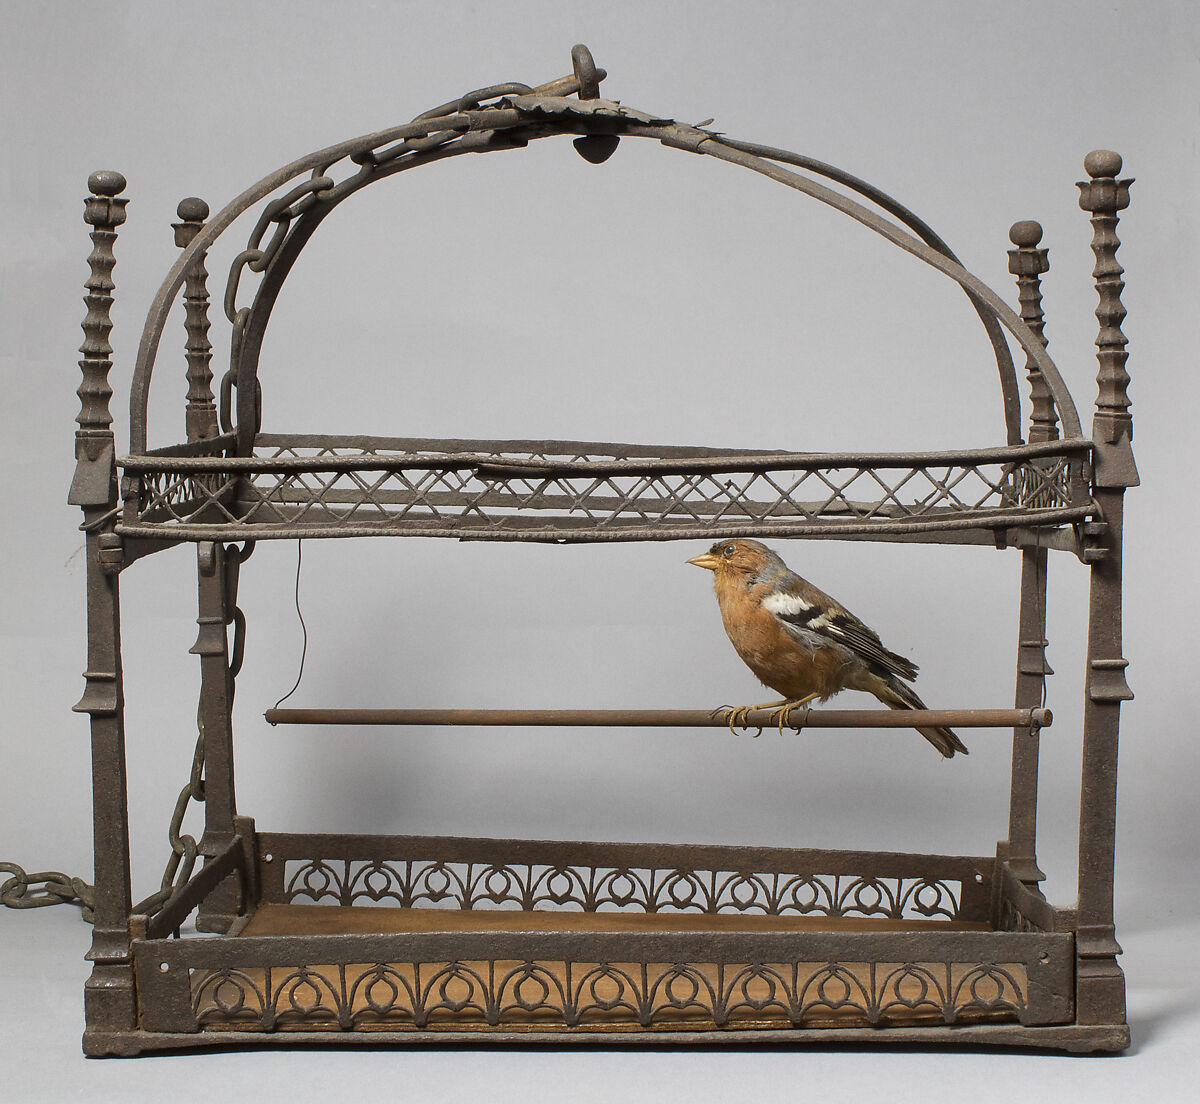 Birdcage, Wrought iron, South French 